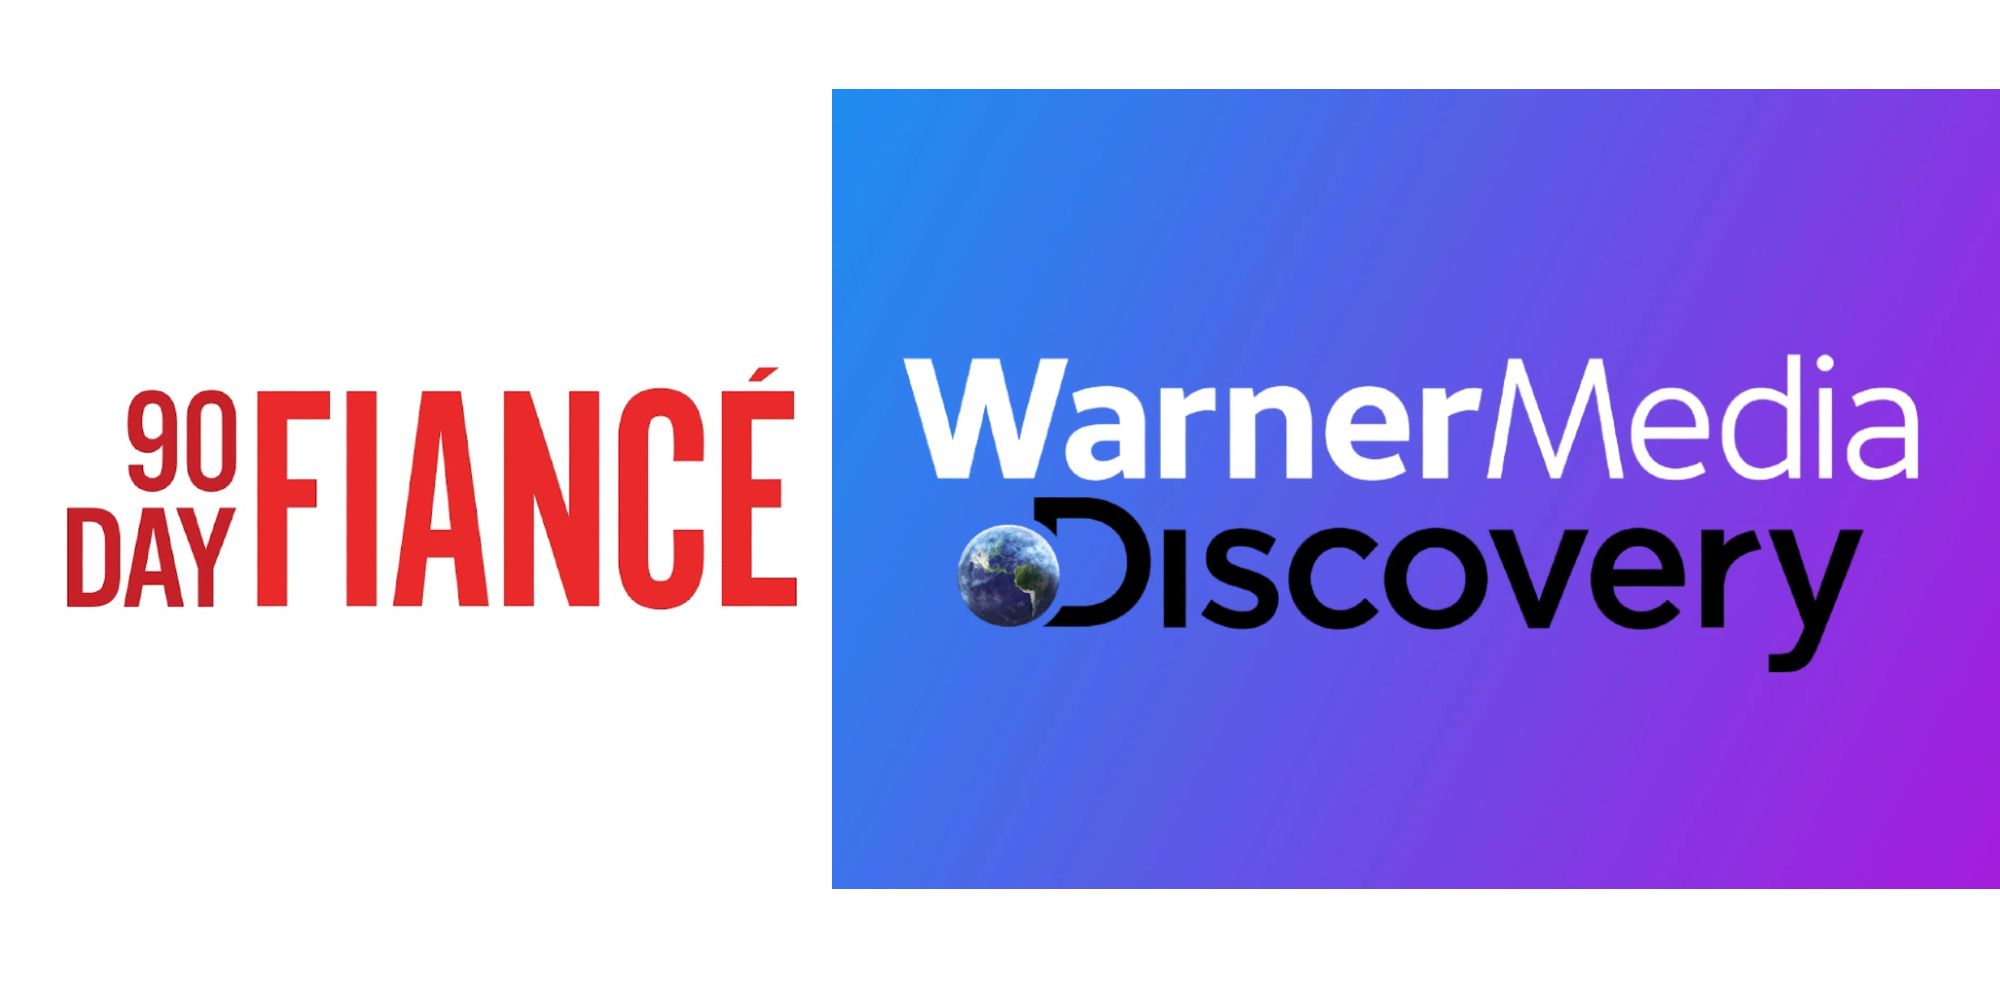 90 Day Fiancé and the Warner-Discovery merger